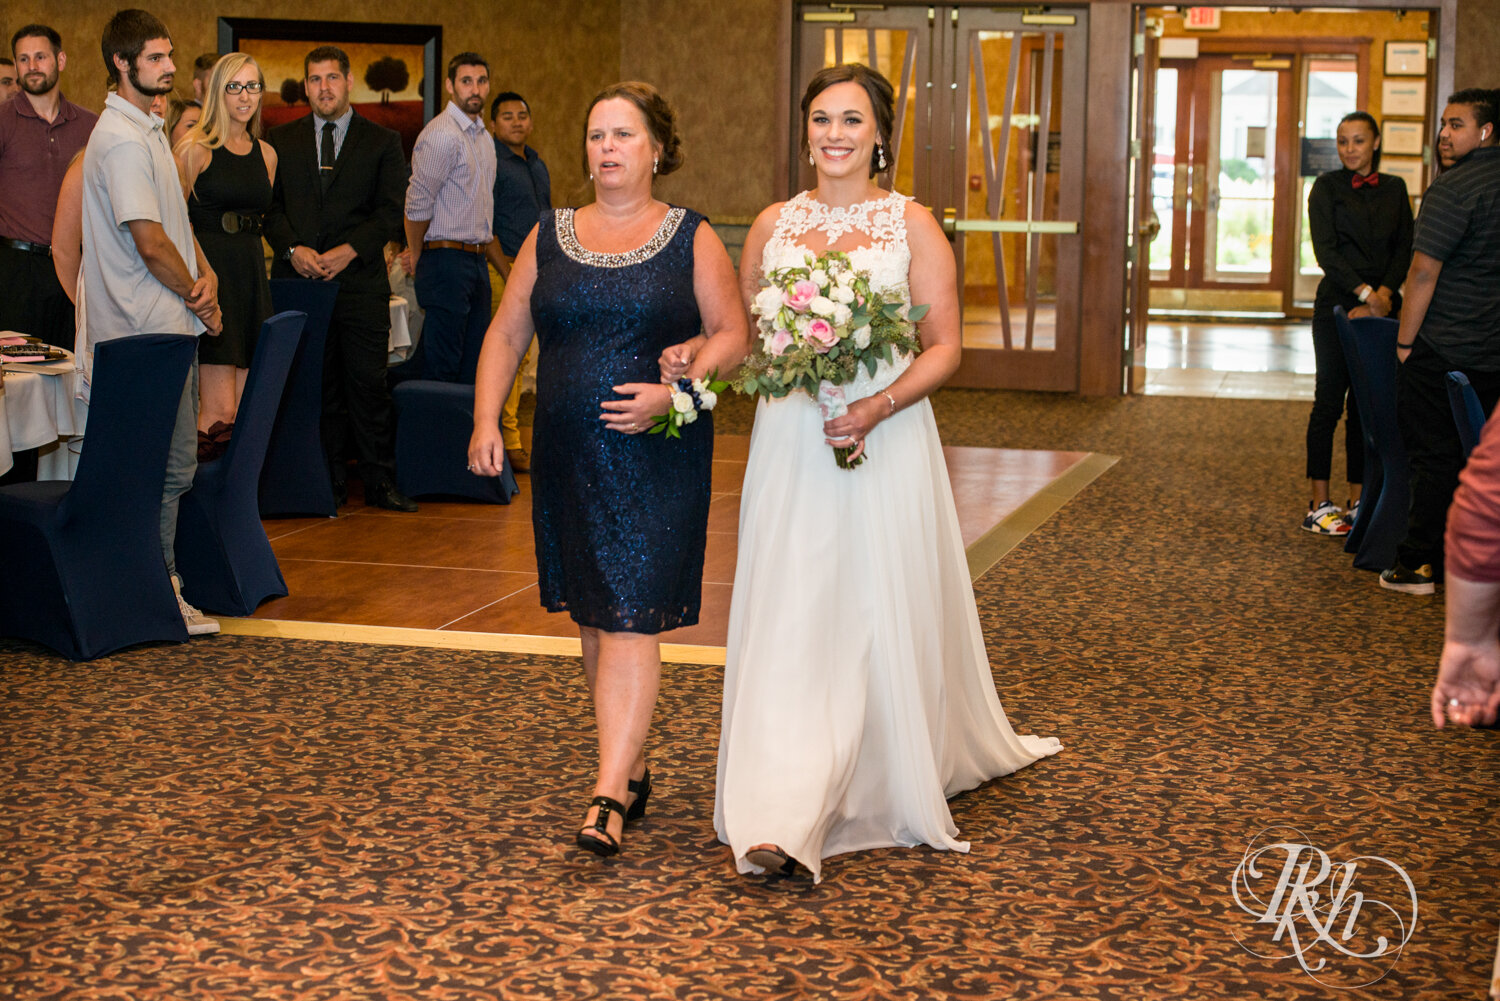 Bride walks down the aisle with mom during indoor wedding ceremony at Crown Room in Rogers, Minnesota.